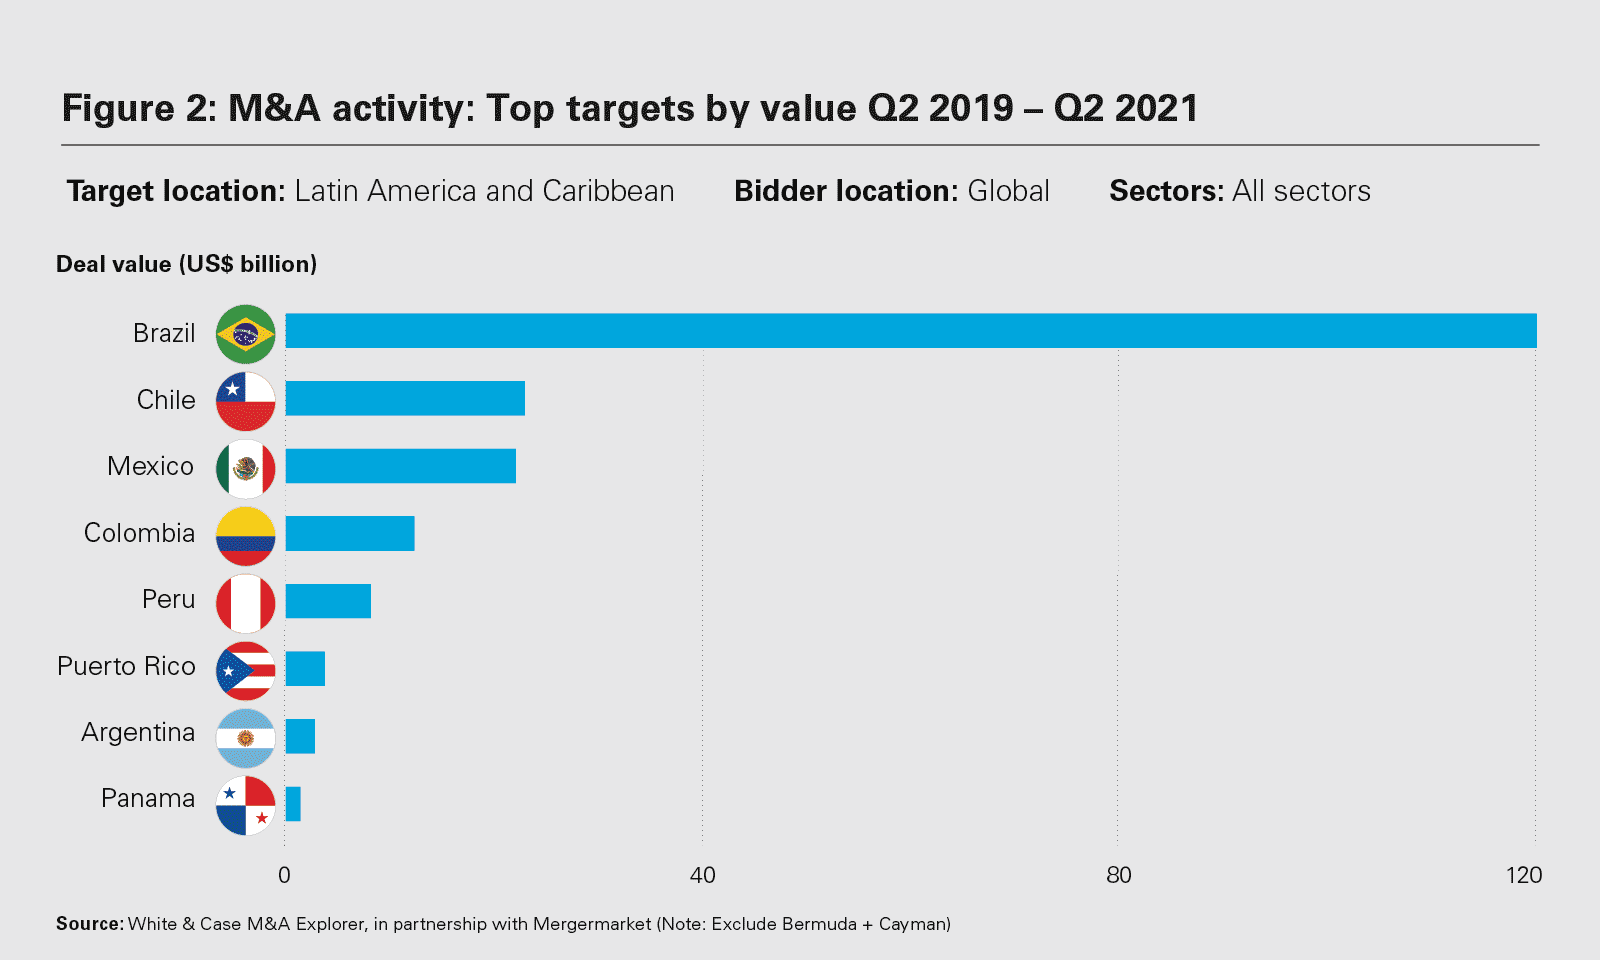 M&A activity: Top targets by value Q2 2019 – Q2 2021